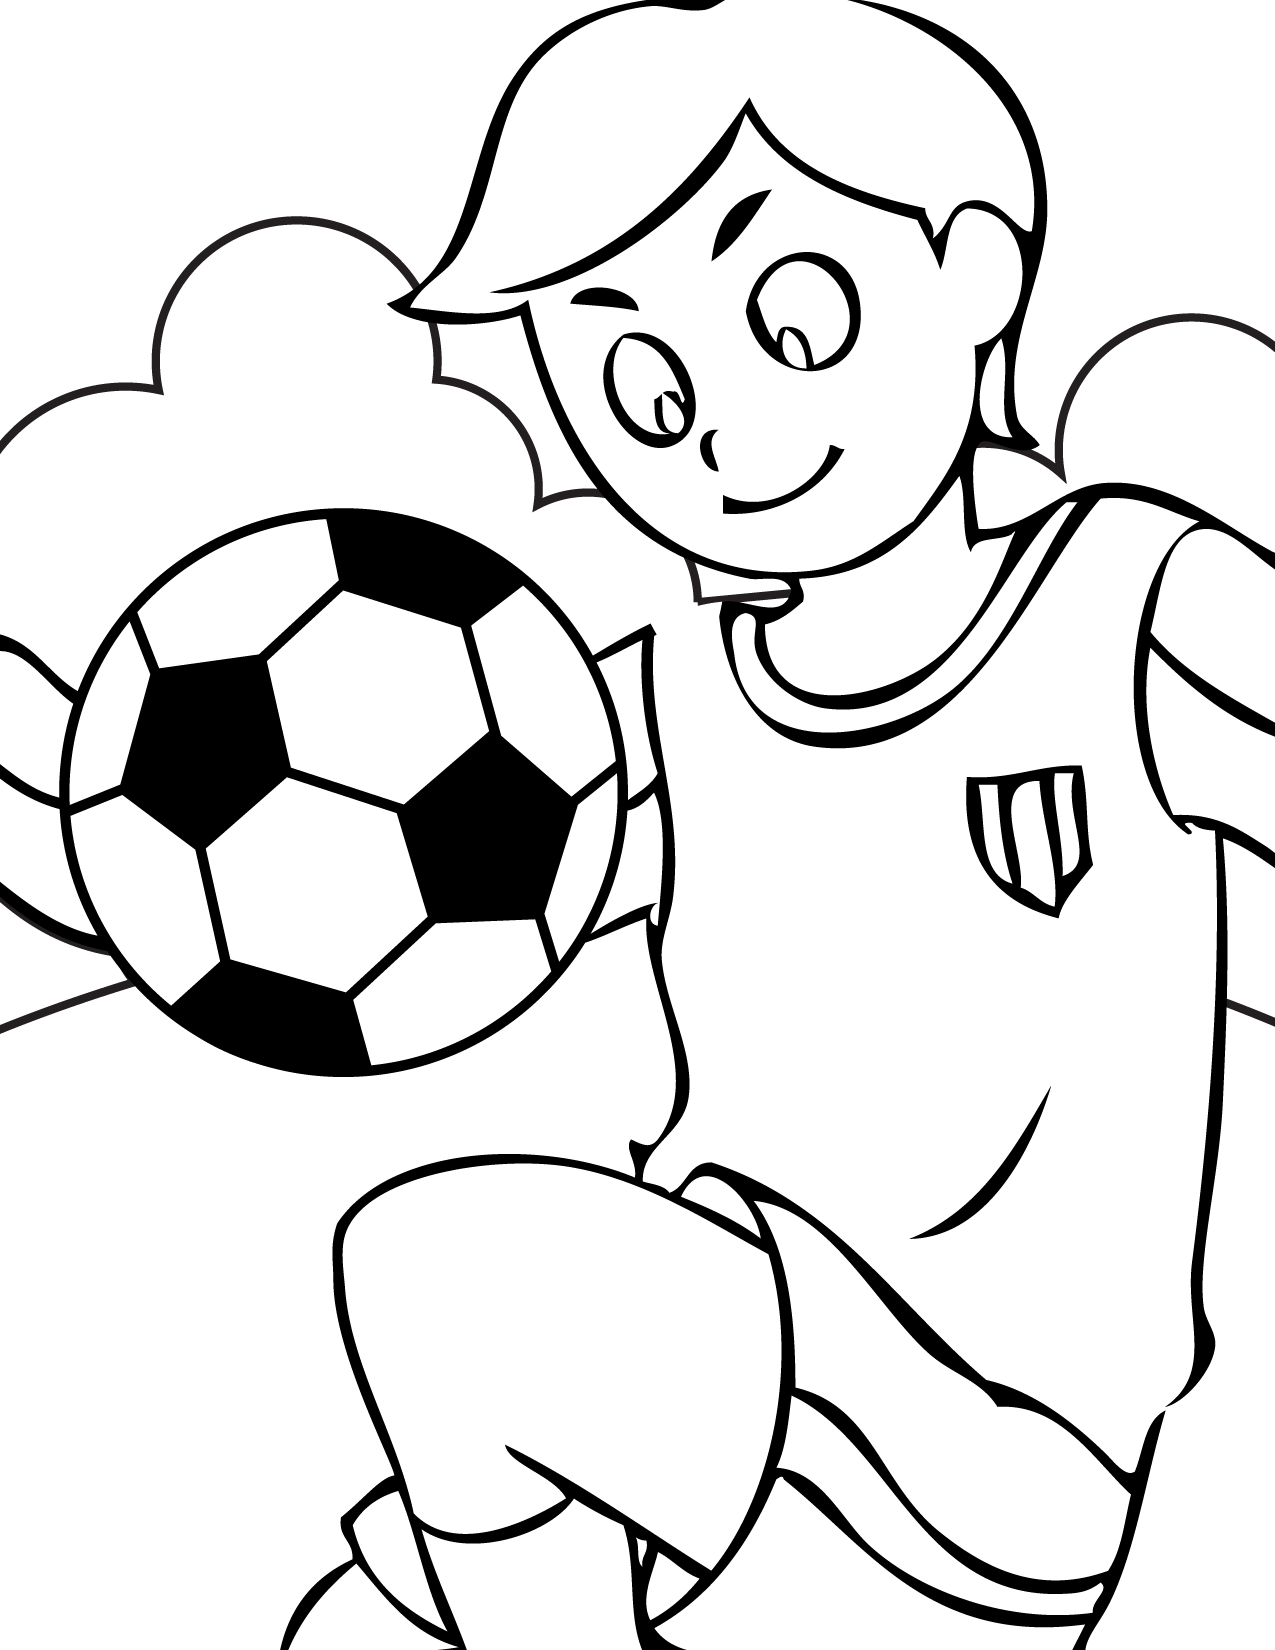 printable-sports-colouring-pages-clip-art-library